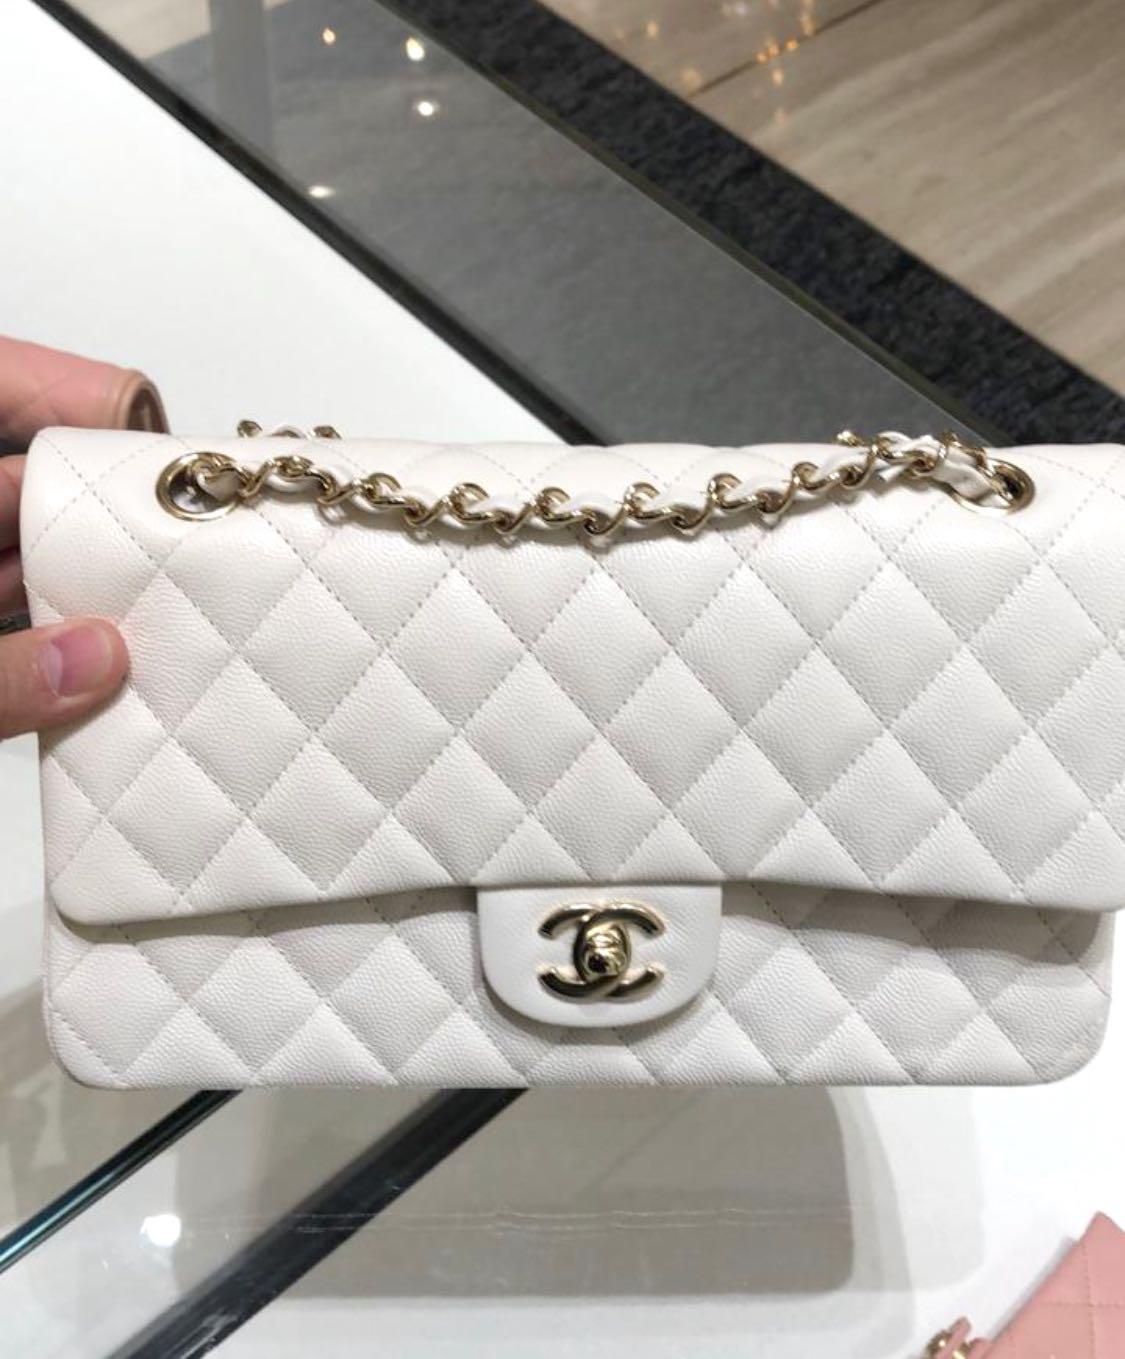 Chanel Bags Online At Huge Discount - Shop Now At Dilli Bazar